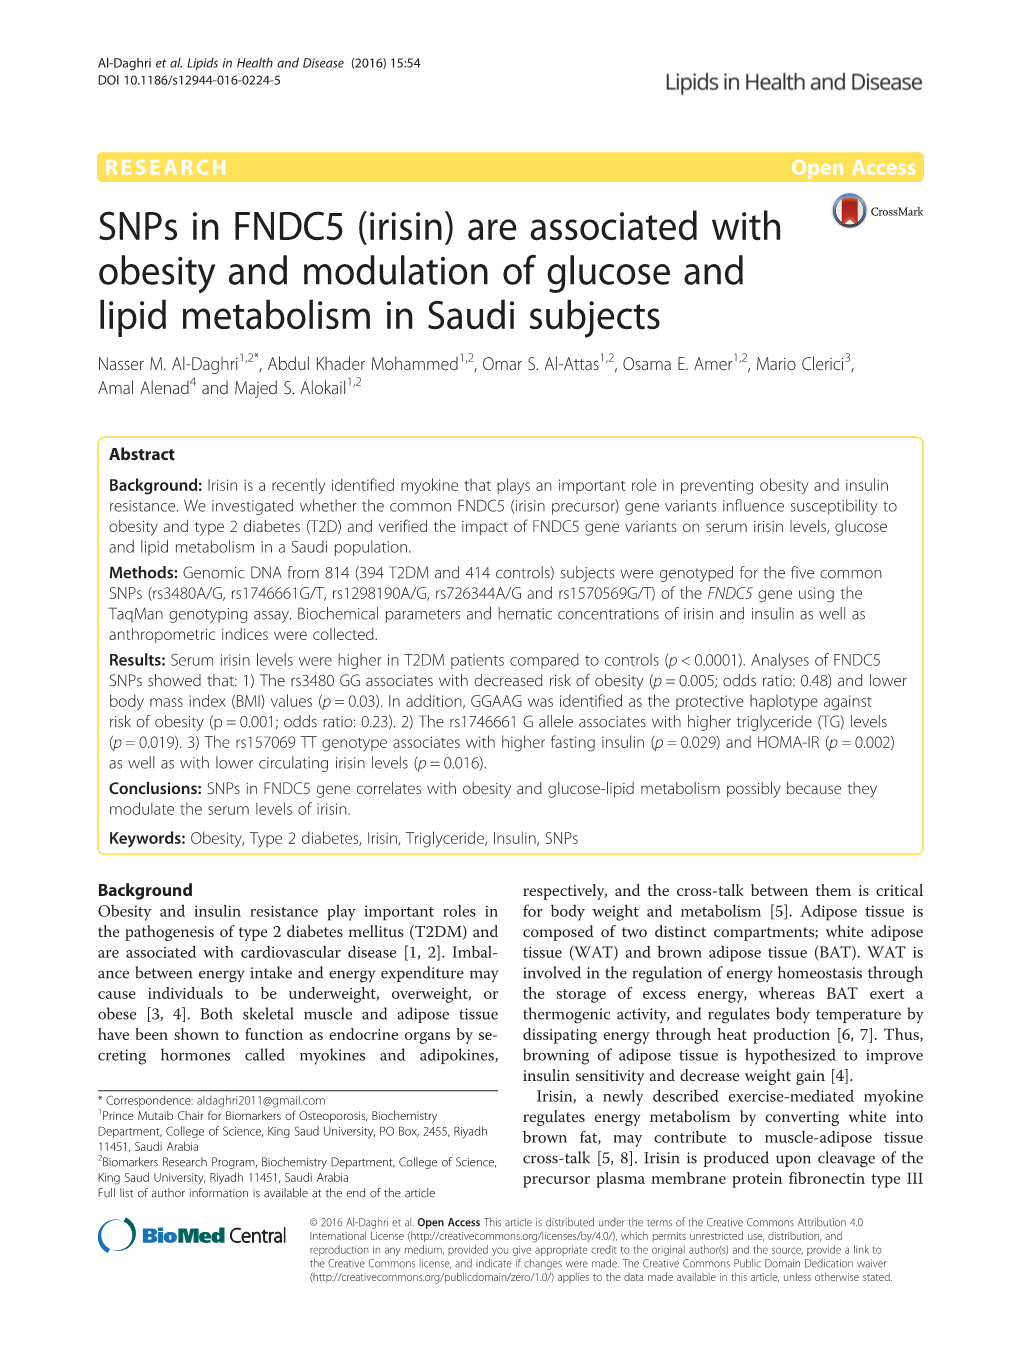 Snps in FNDC5 (Irisin) Are Associated with Obesity and Modulation of Glucose and Lipid Metabolism in Saudi Subjects Nasser M